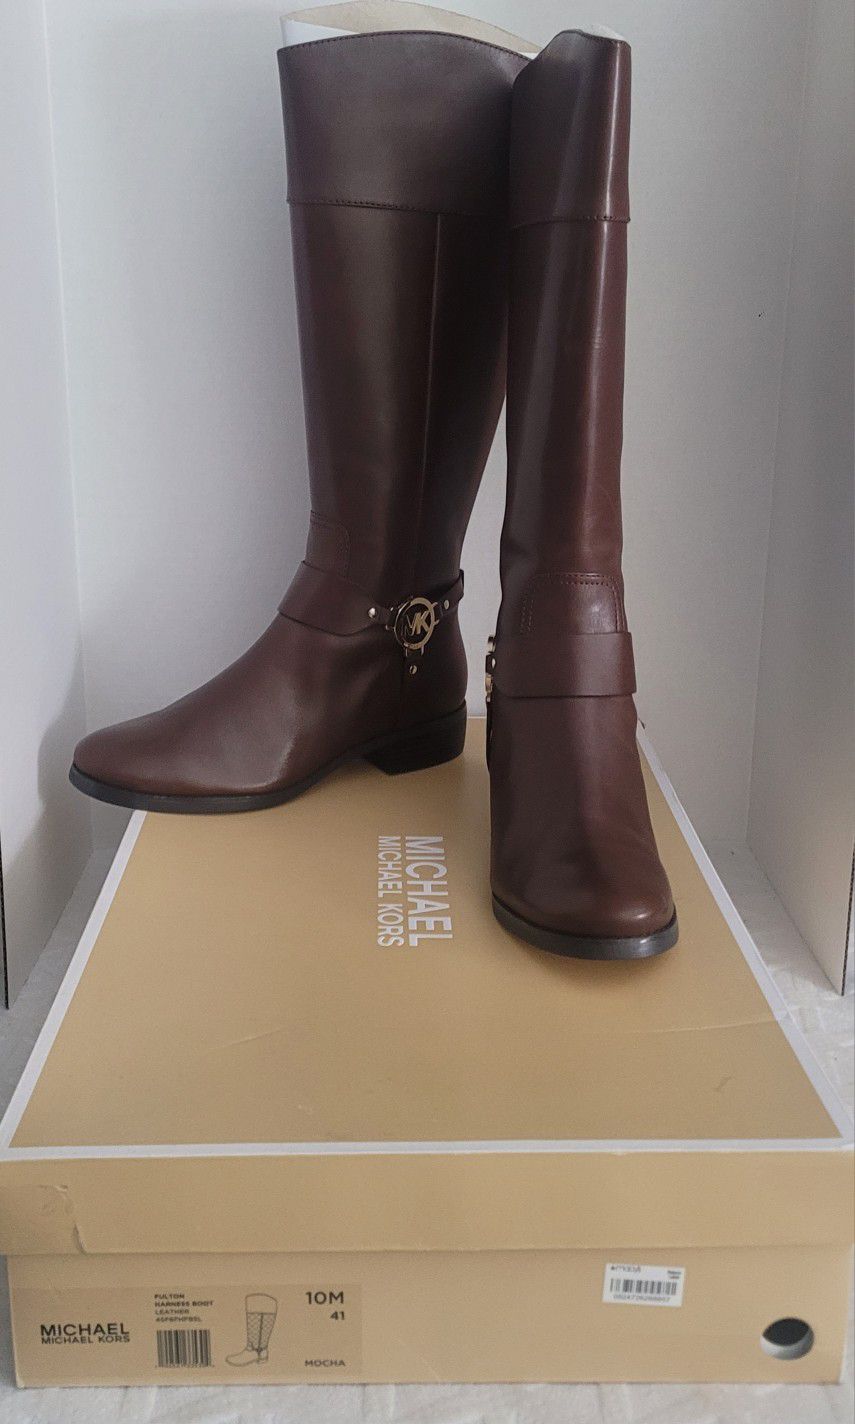 Michael Kors Fulton Harness Leather Ladies Boots Size 10M Mocha With Box